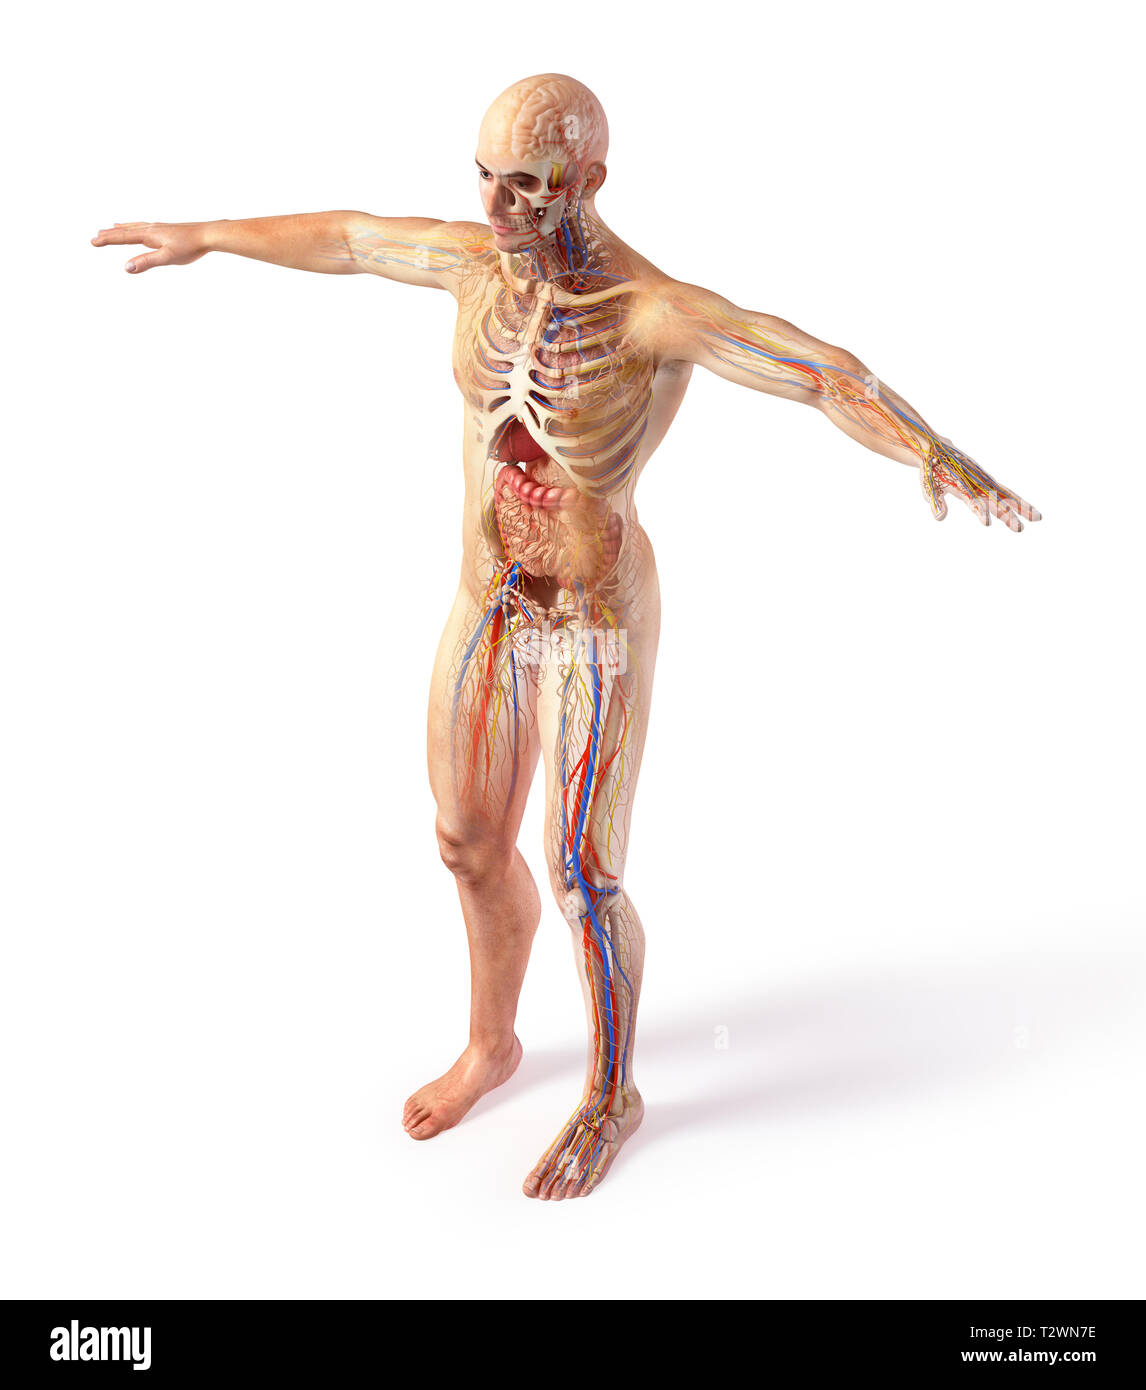 Man total anatomy systems diagram with ghost effect. Full figure standing on white background. Stock Photo